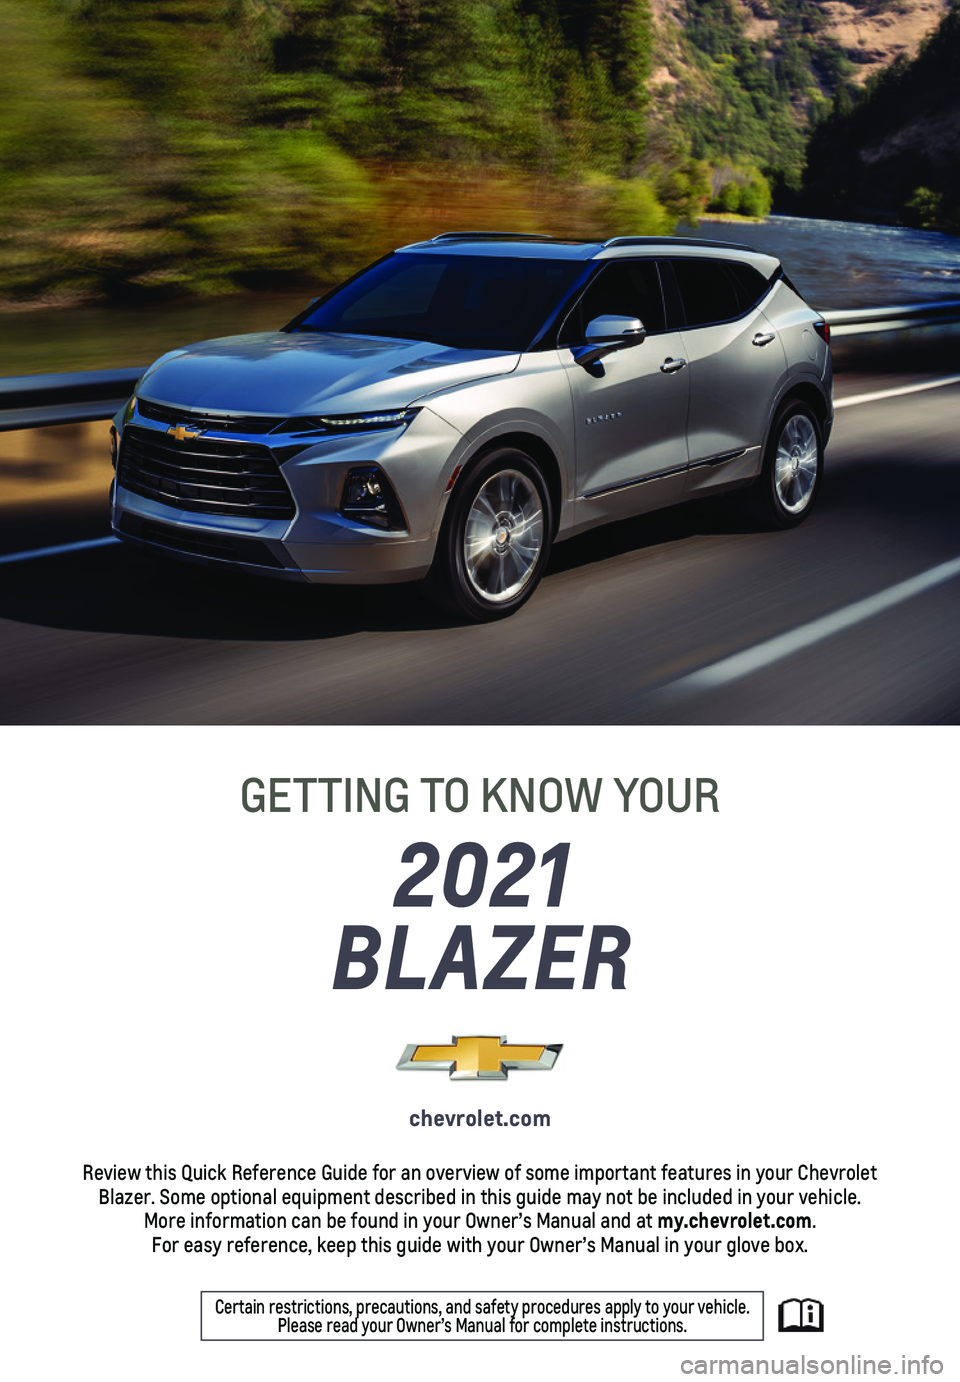 CHEVROLET BLAZER 2021  Get To Know Guide 1
2021
BLAZER
GETTING TO KNOW YOUR
chevrolet.com
Review this Quick Reference Guide for an overview of some important feat\
ures in your Chevrolet Blazer. Some optional equipment described in this guid